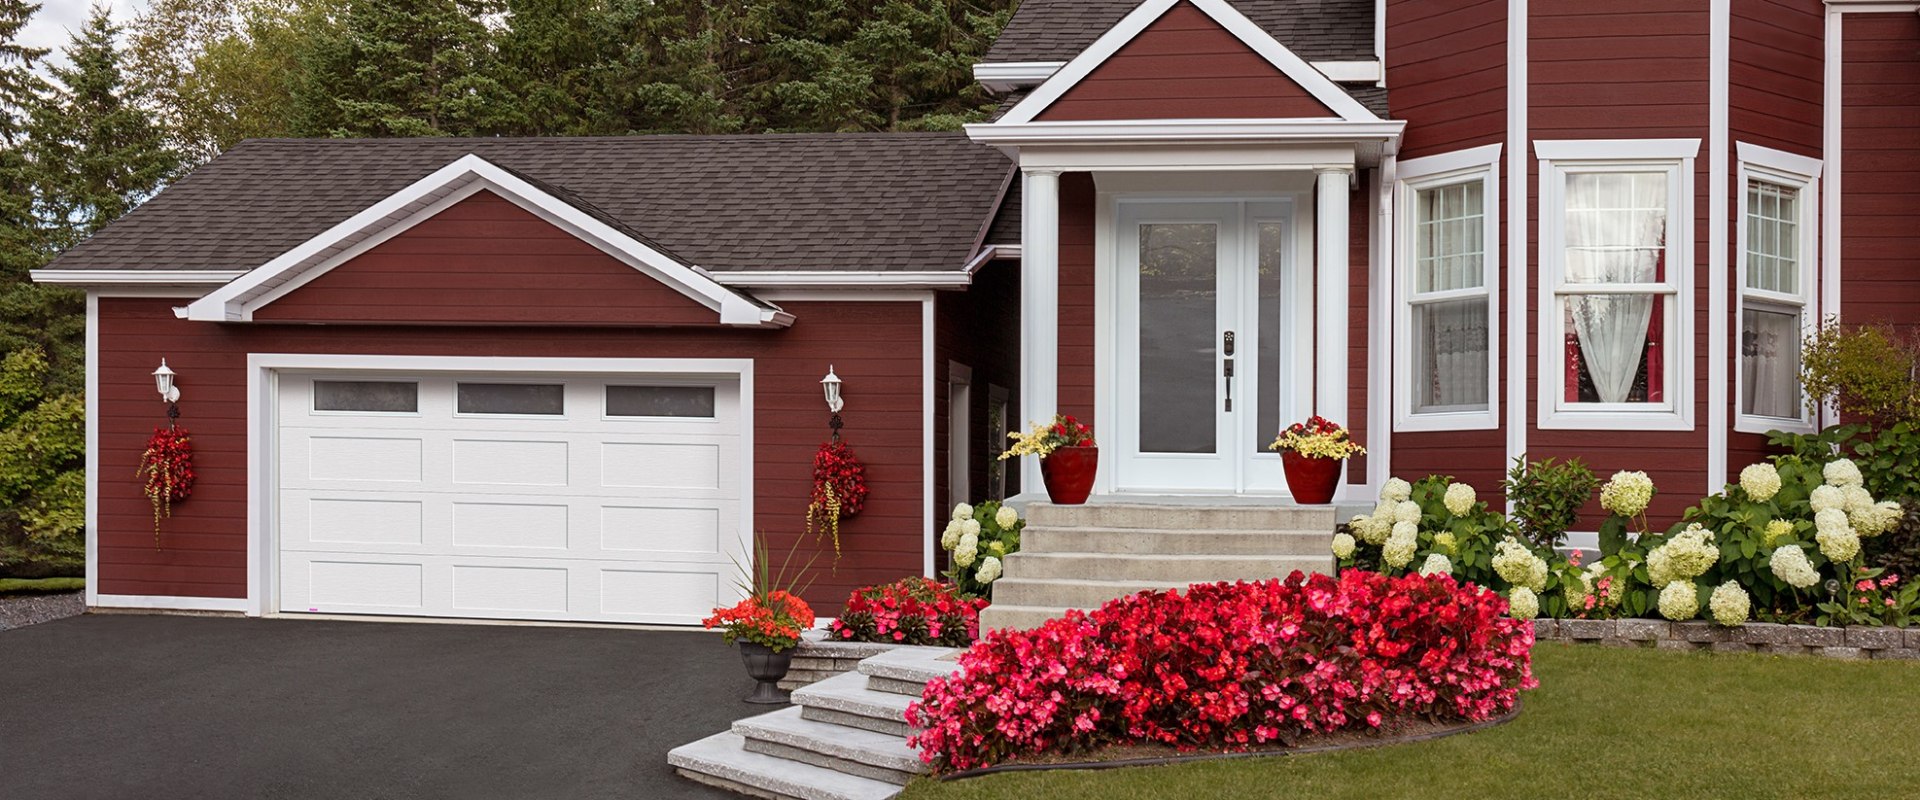 10 Landscaping Ideas to Boost Your Home's Curb Appeal